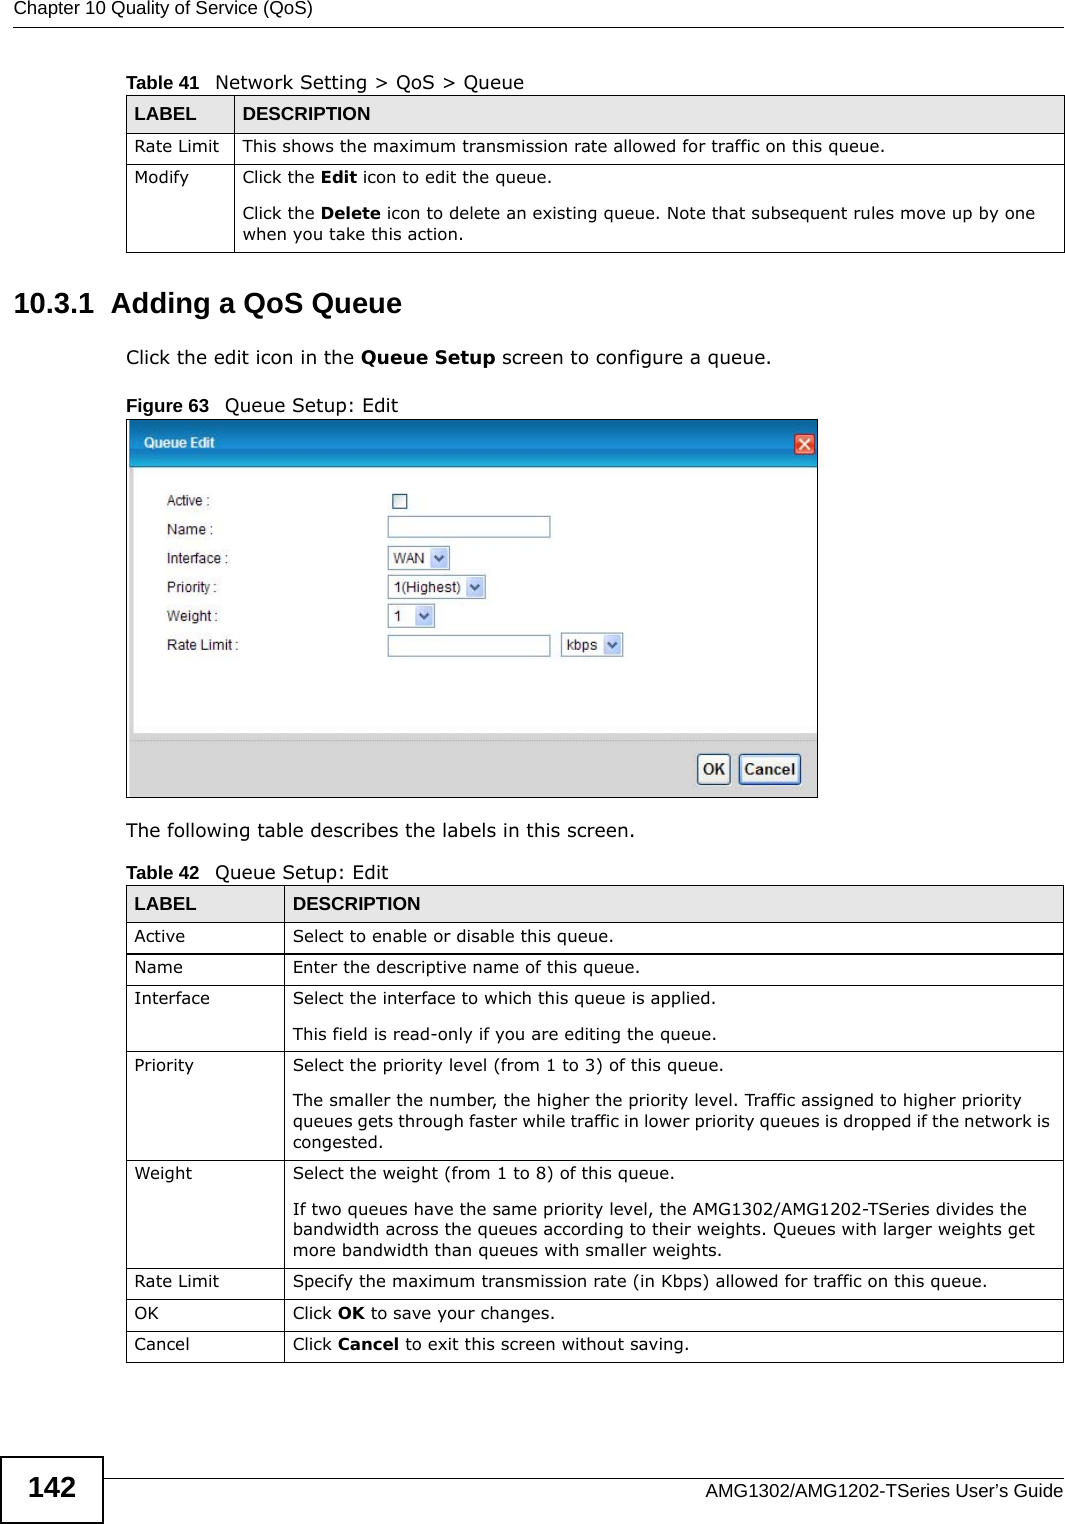 Chapter 10 Quality of Service (QoS)AMG1302/AMG1202-TSeries User’s Guide14210.3.1  Adding a QoS Queue Click the edit icon in the Queue Setup screen to configure a queue. Figure 63   Queue Setup: Edit The following table describes the labels in this screen.  Rate Limit This shows the maximum transmission rate allowed for traffic on this queue.Modify Click the Edit icon to edit the queue.Click the Delete icon to delete an existing queue. Note that subsequent rules move up by one when you take this action.Table 41   Network Setting &gt; QoS &gt; QueueLABEL DESCRIPTIONTable 42   Queue Setup: EditLABEL DESCRIPTIONActive Select to enable or disable this queue.Name Enter the descriptive name of this queue.Interface Select the interface to which this queue is applied.This field is read-only if you are editing the queue.Priority Select the priority level (from 1 to 3) of this queue.The smaller the number, the higher the priority level. Traffic assigned to higher priority queues gets through faster while traffic in lower priority queues is dropped if the network is congested.Weight Select the weight (from 1 to 8) of this queue. If two queues have the same priority level, the AMG1302/AMG1202-TSeries divides the bandwidth across the queues according to their weights. Queues with larger weights get more bandwidth than queues with smaller weights.Rate Limit Specify the maximum transmission rate (in Kbps) allowed for traffic on this queue.OK Click OK to save your changes.Cancel Click Cancel to exit this screen without saving.